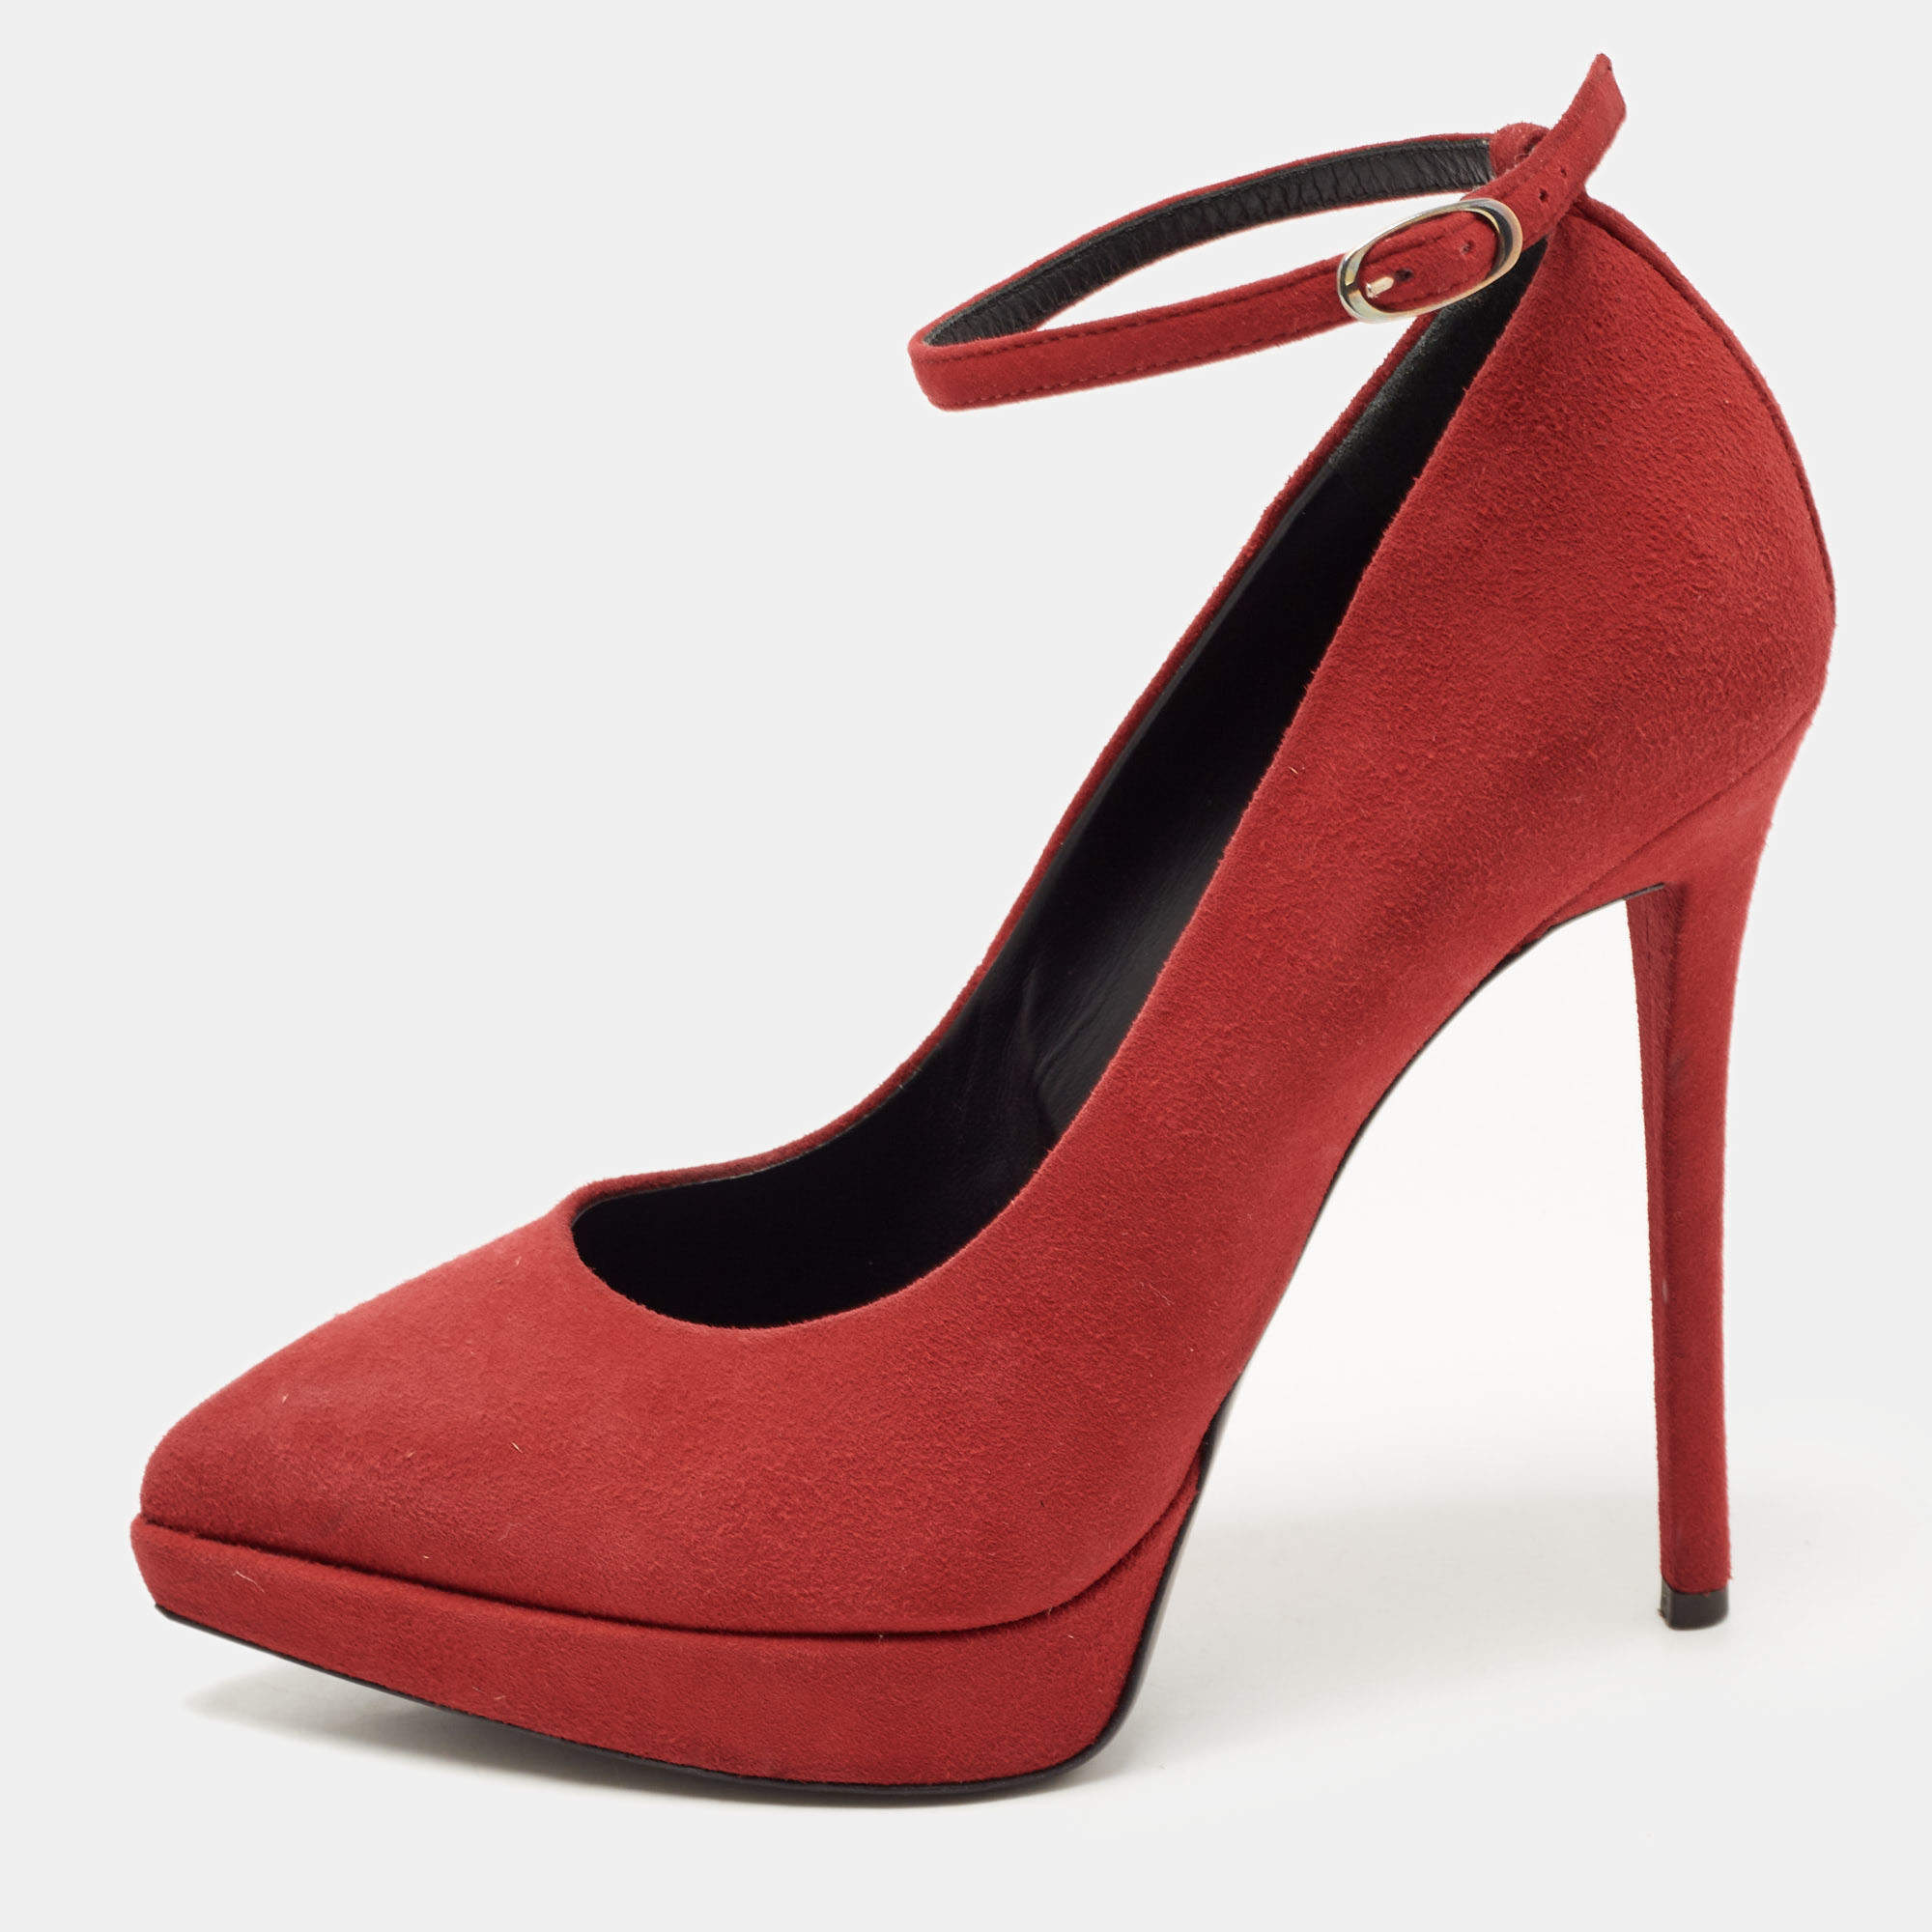 Giuseppe Zanotti Red Suede Ankle Strap Platform Pointed Toe Pumps Size 37